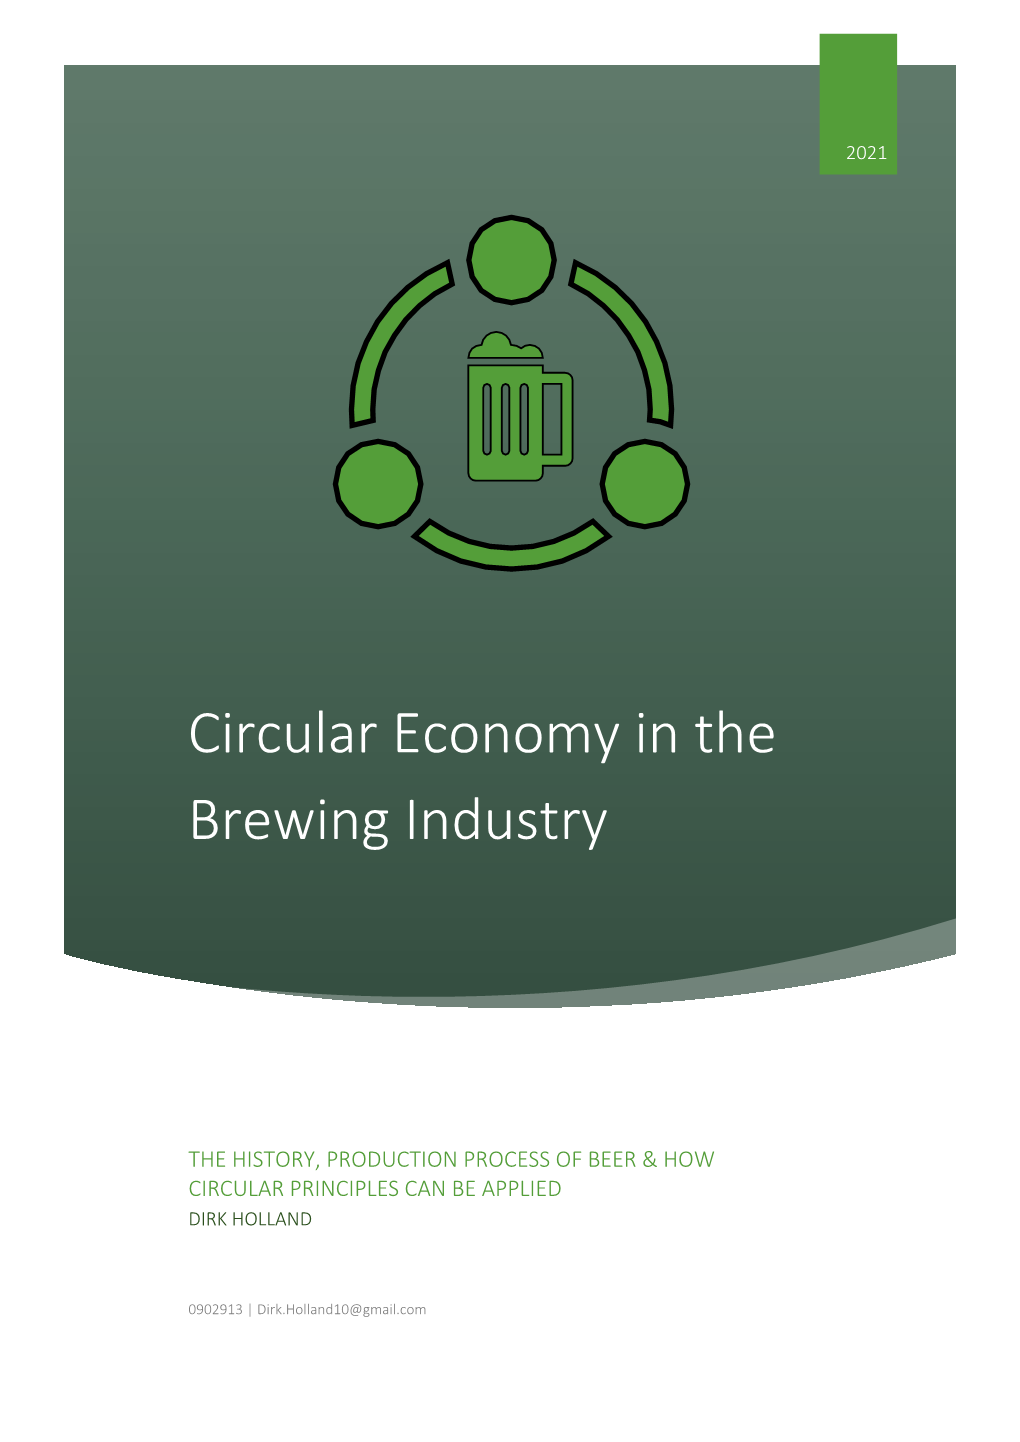 Circular Economy in the Brewing Industry